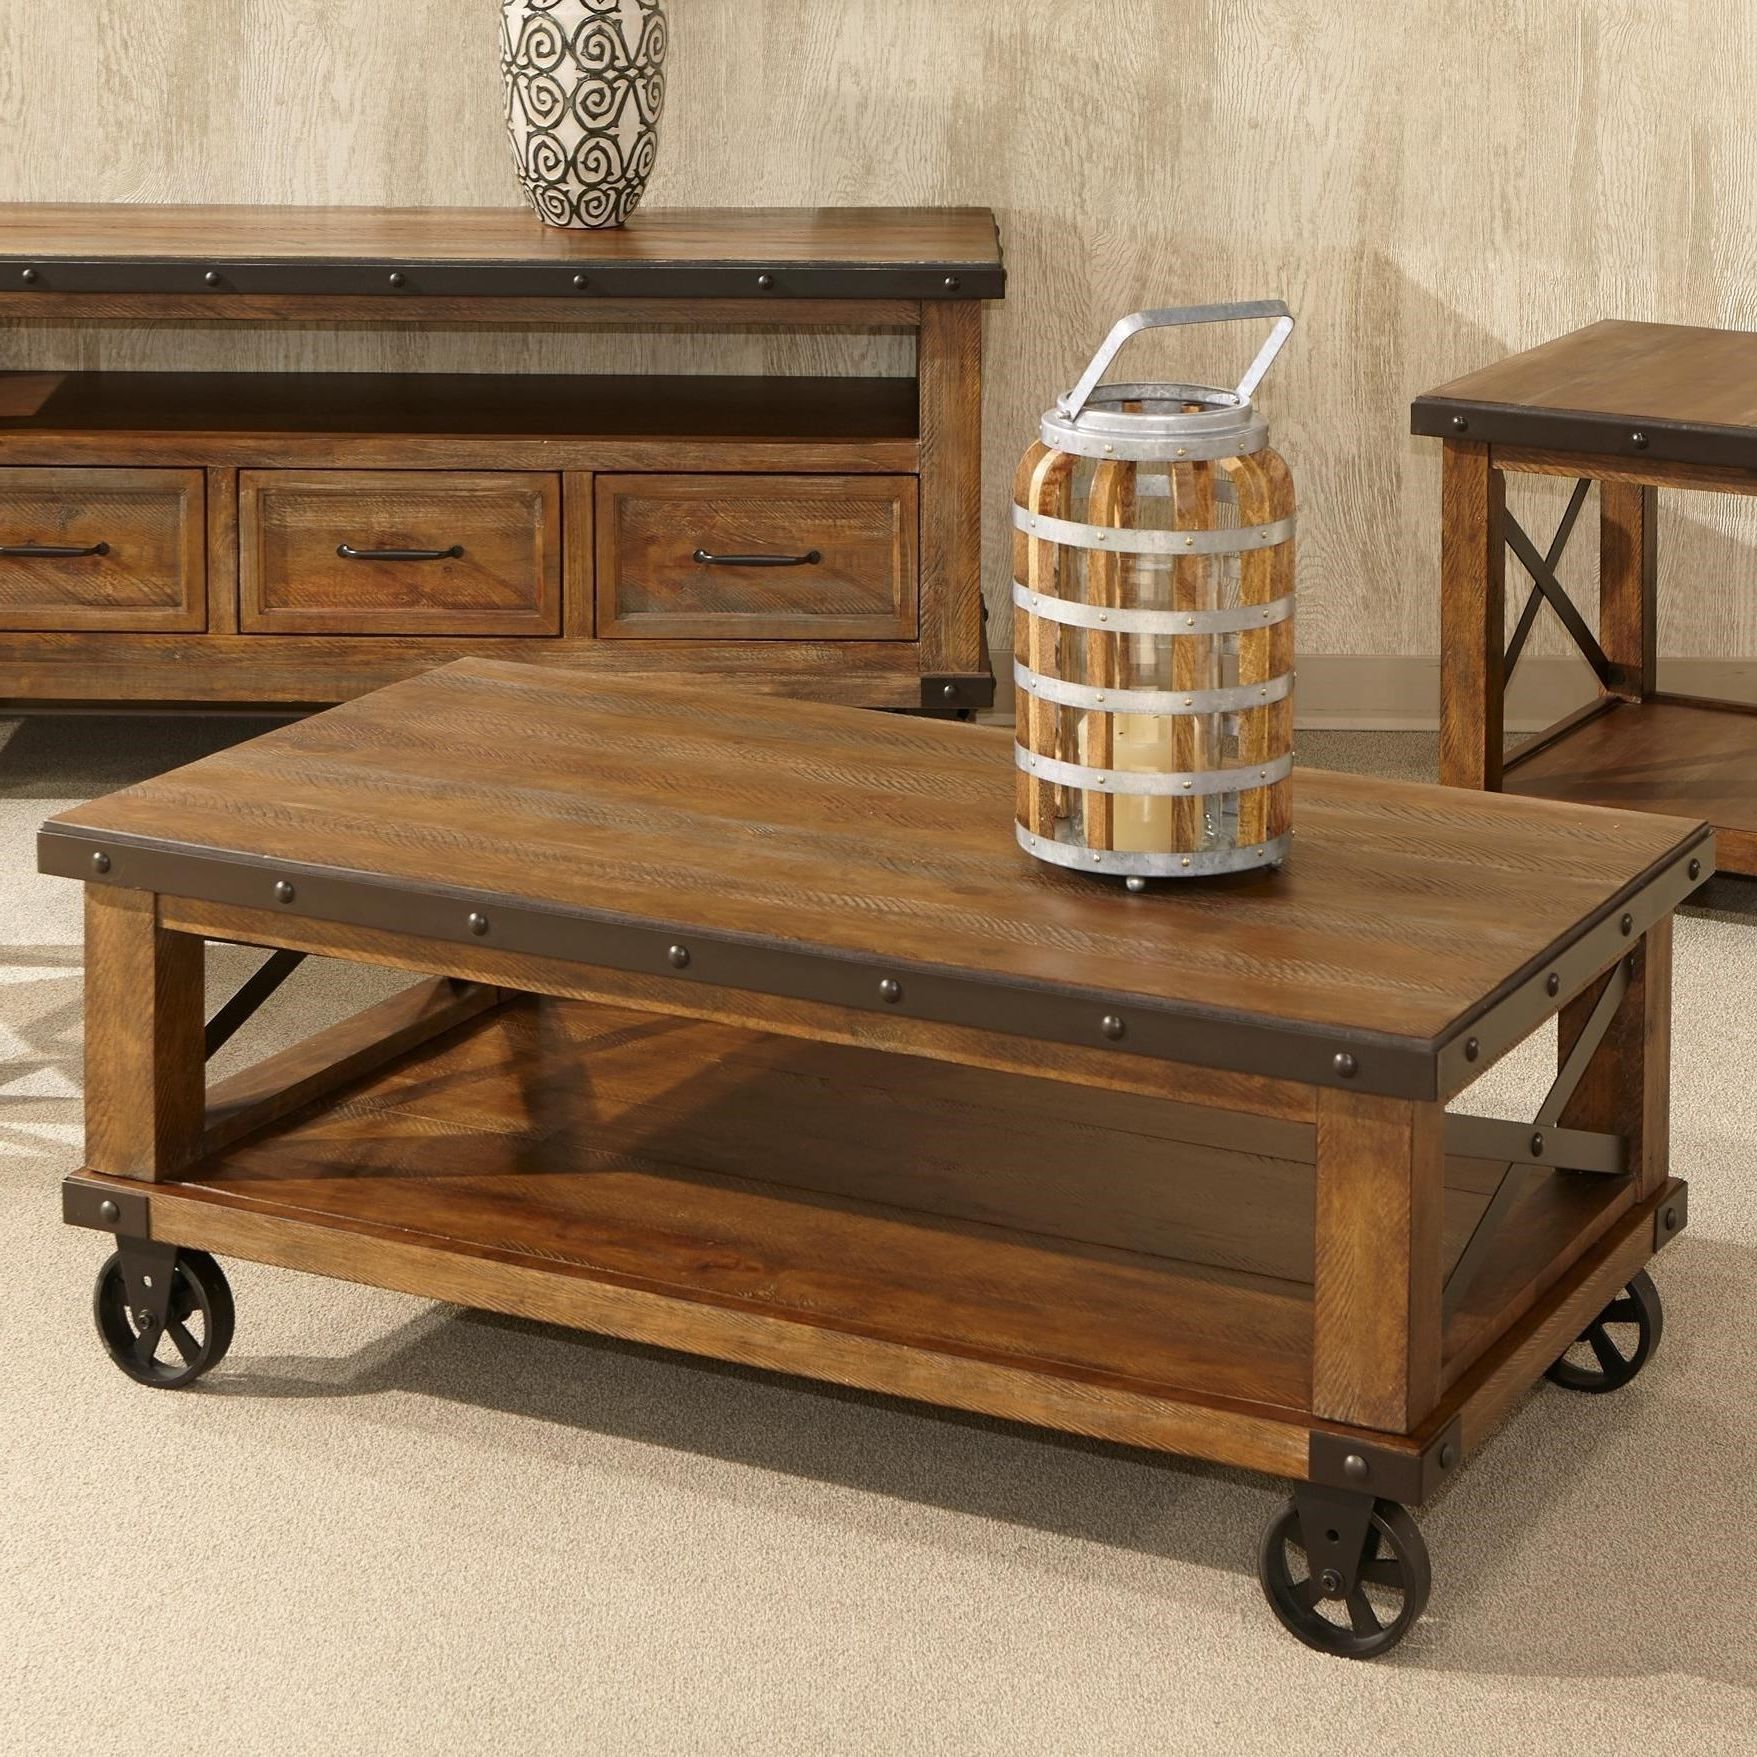 Rustic Coffee Table With Casters : Industrial Wood And Metal Coffee With Coffee Tables With Casters (View 17 of 20)